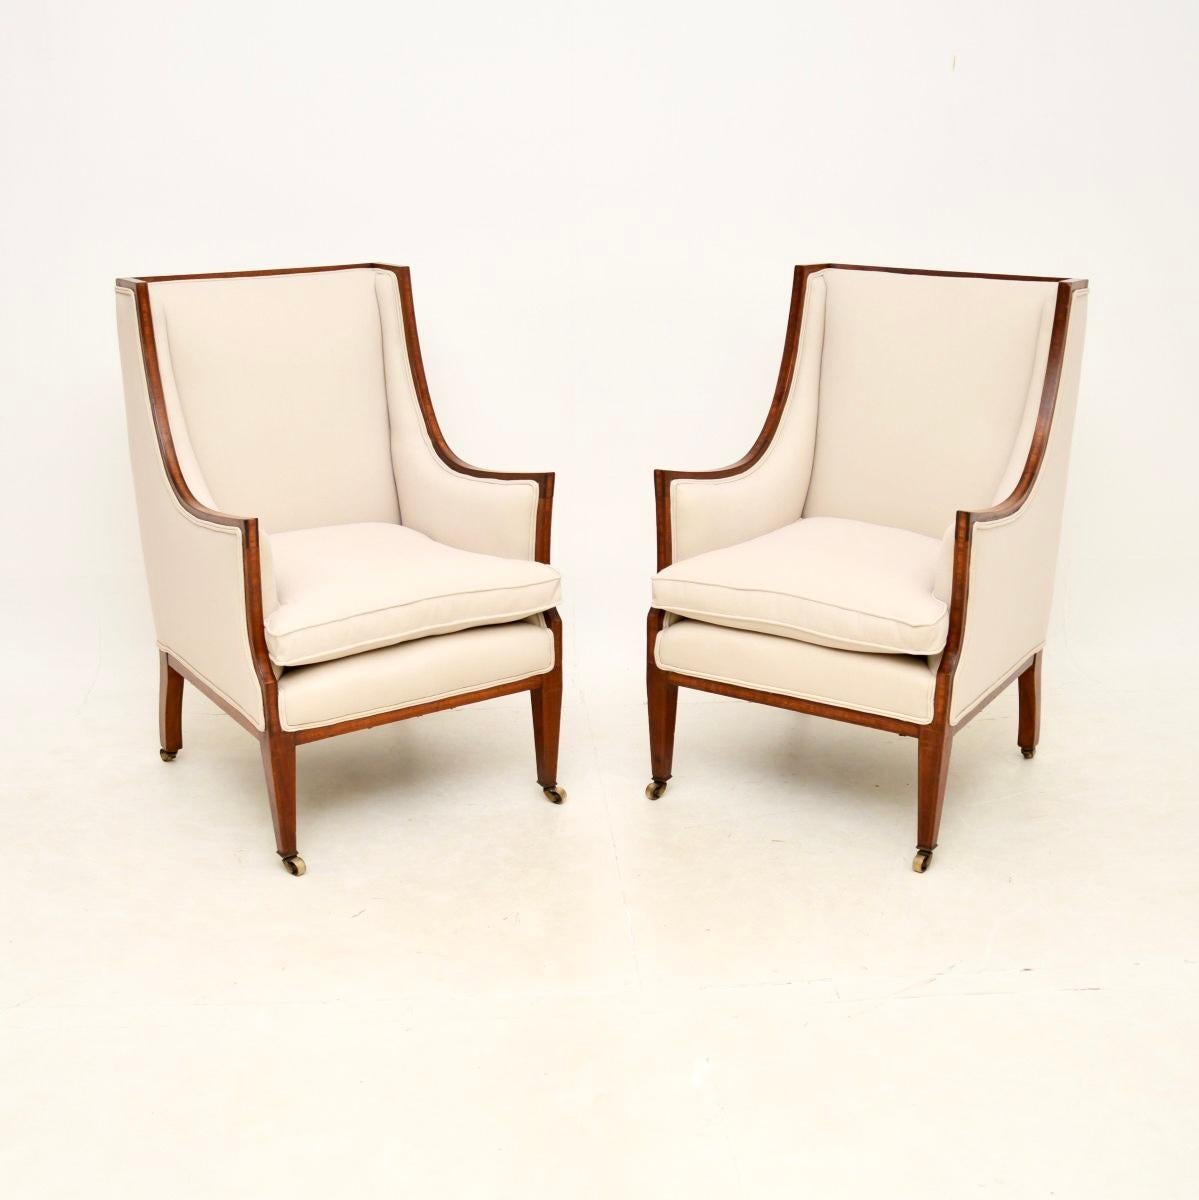 A fantastic pair of antique Edwardian armchairs. They were made in England, they date from the 1900-1910 period.

They are of extremely fine quality, with a beautifully elegant and shapely design. The frames have gorgeous inlaid satinwood banding